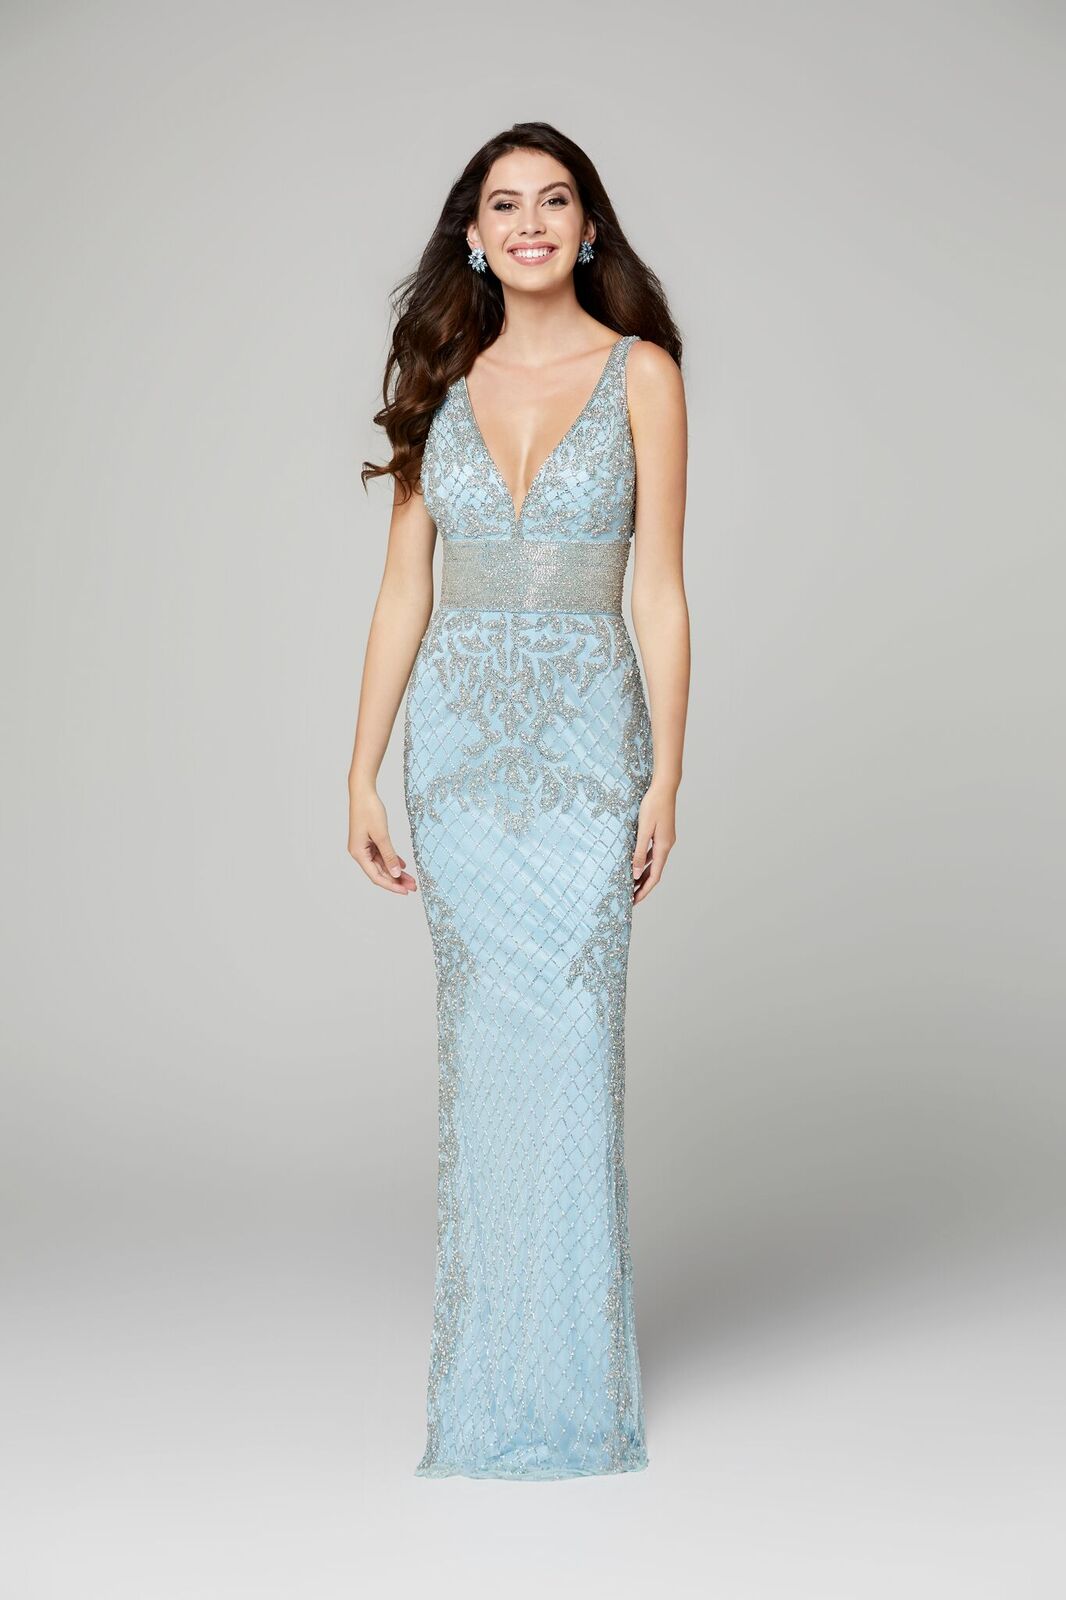 Primavera Couture 3425 is a Powder Blue beaded Prom Dress, Pageant Gown, Wedding Dress & Formal Evening Wear gown. This is a fully beaded prom dress with a v neckline and horizontal beaded high waistline.    Powder Blue  size 6